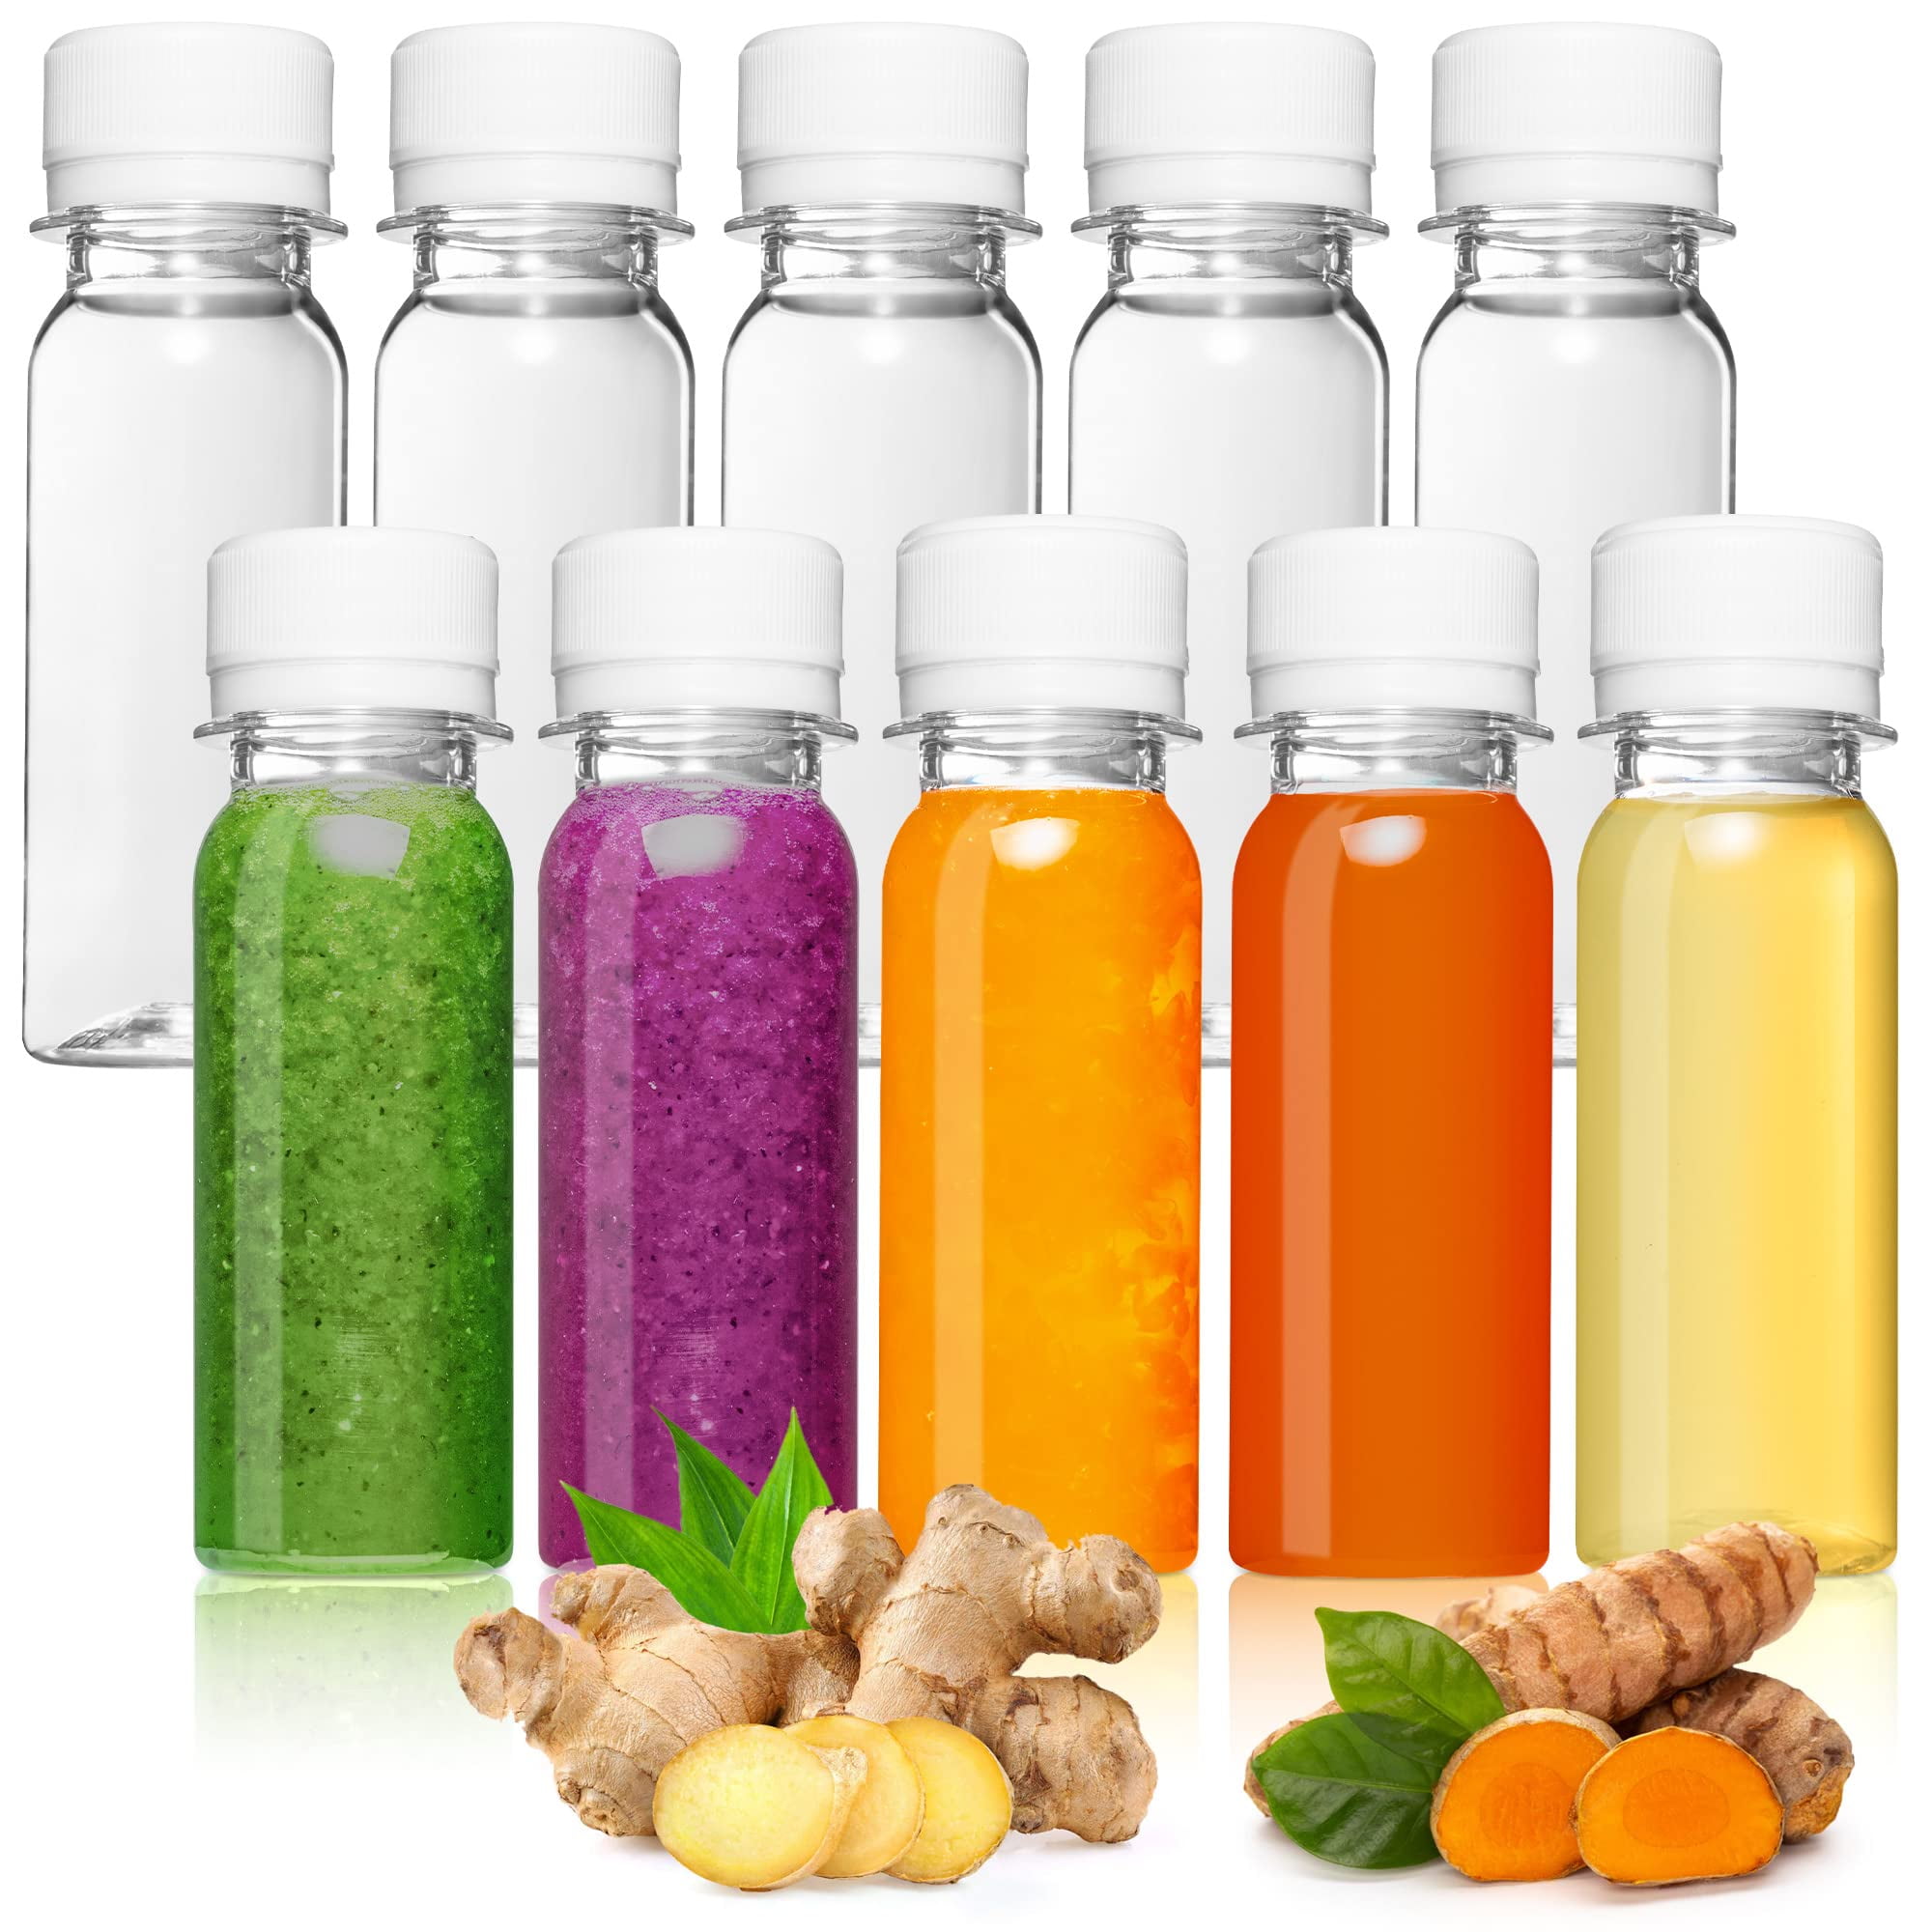 Mini Wellness 2oz Juice Bottles - The Perfect Solution for Healthy